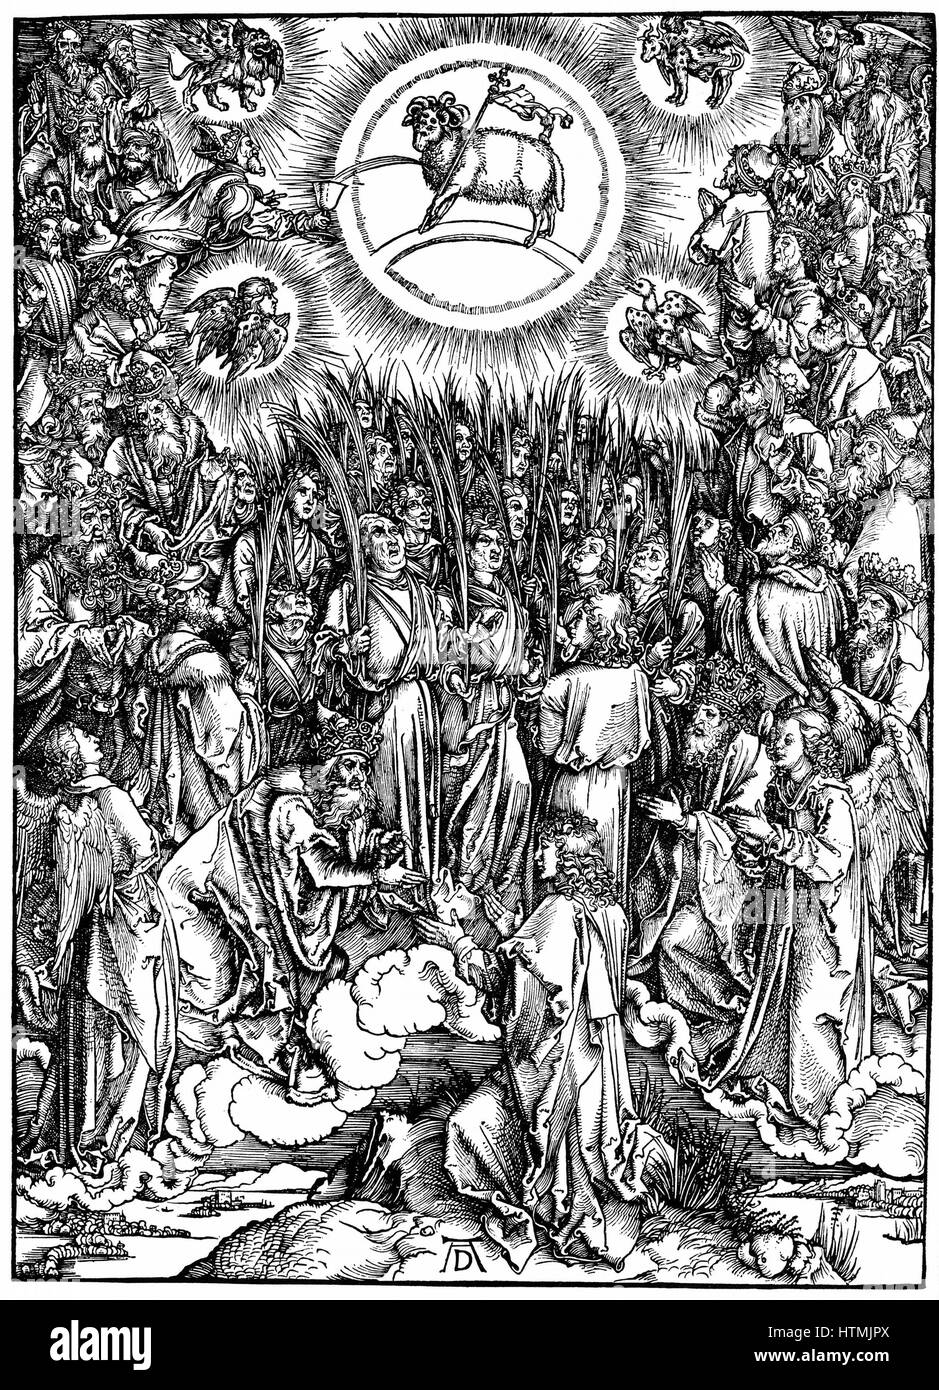 The Revelation of S. John (Apocalypse) The Adoration of the Lamb and the Hymn of the Chosen Woodcut by Albrecht Durer c.1498 Stock Photo